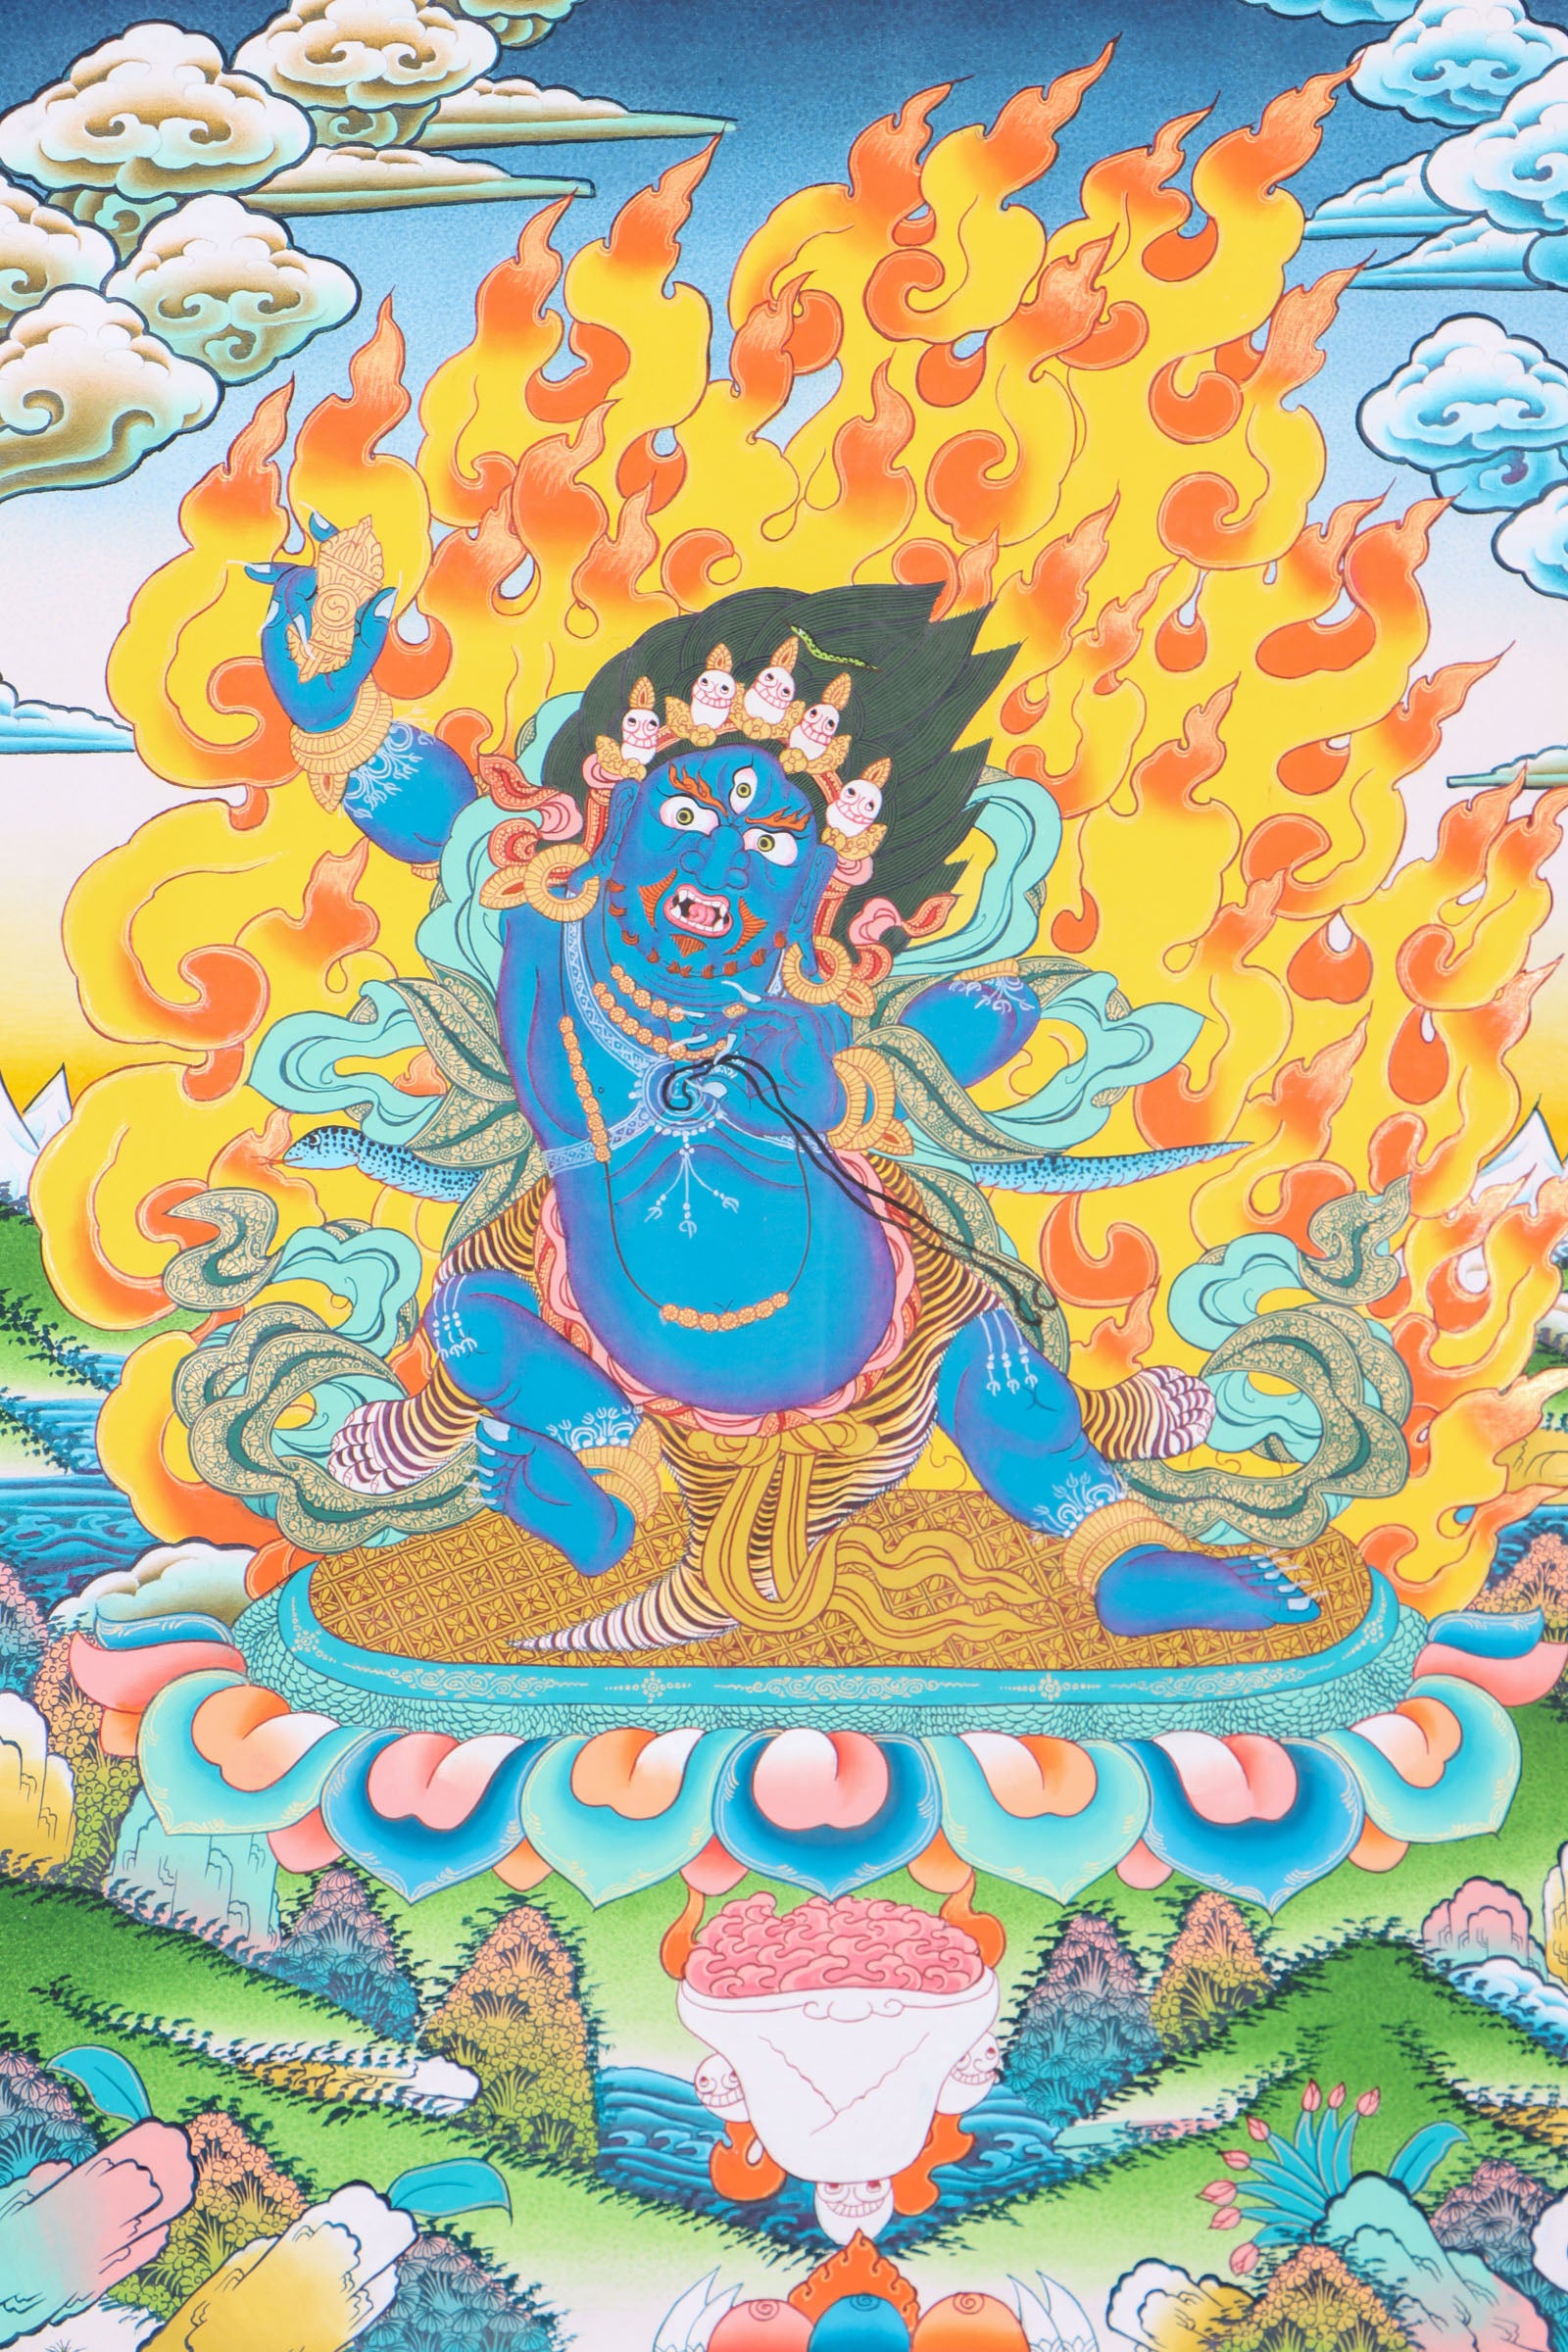 Vajrapani Thangka for transformative power of wisdom and compassion.